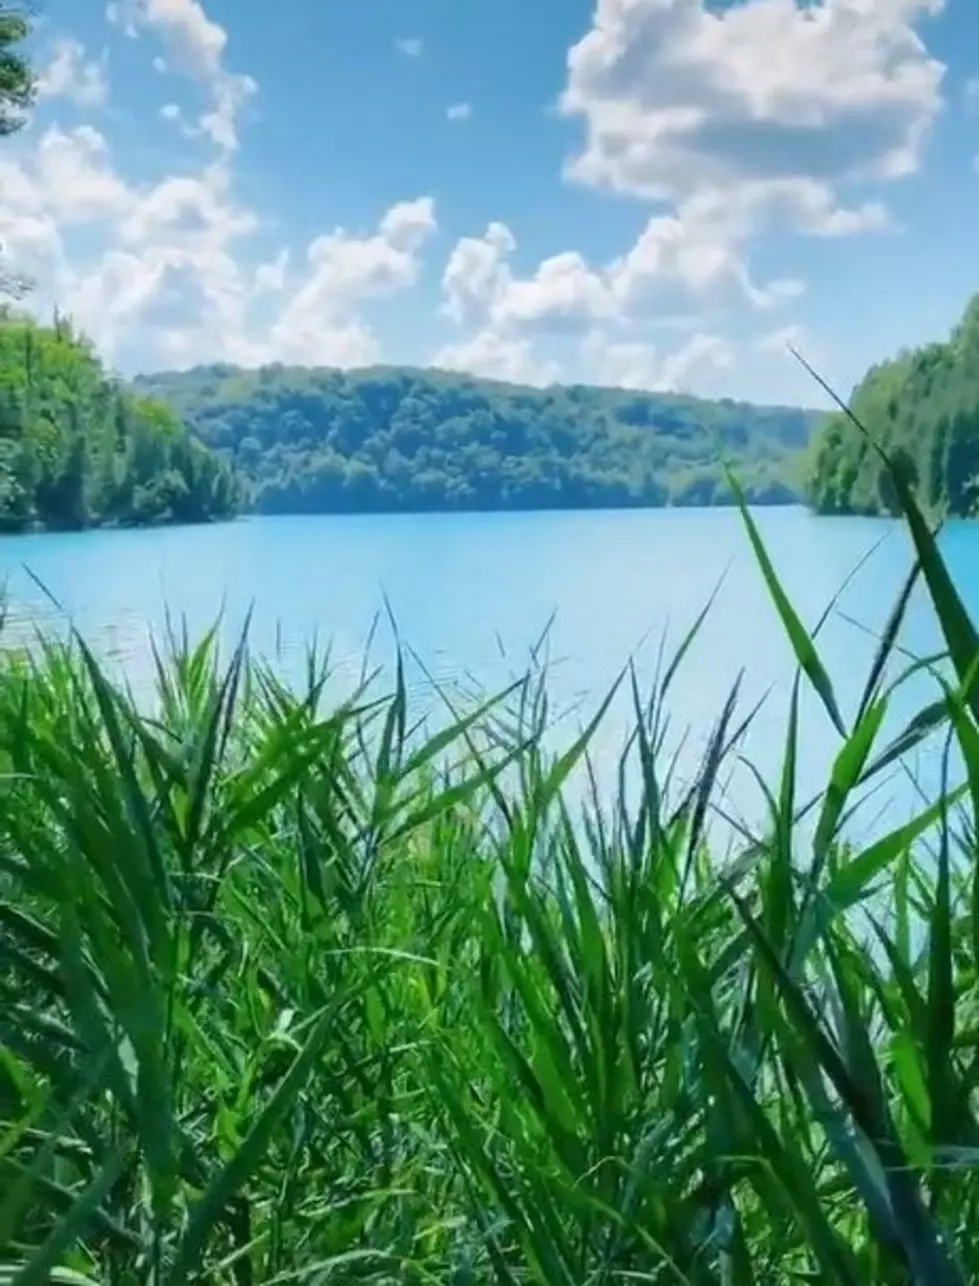 Stunningly Blue Central New York Lake Gains Attention on TikTok